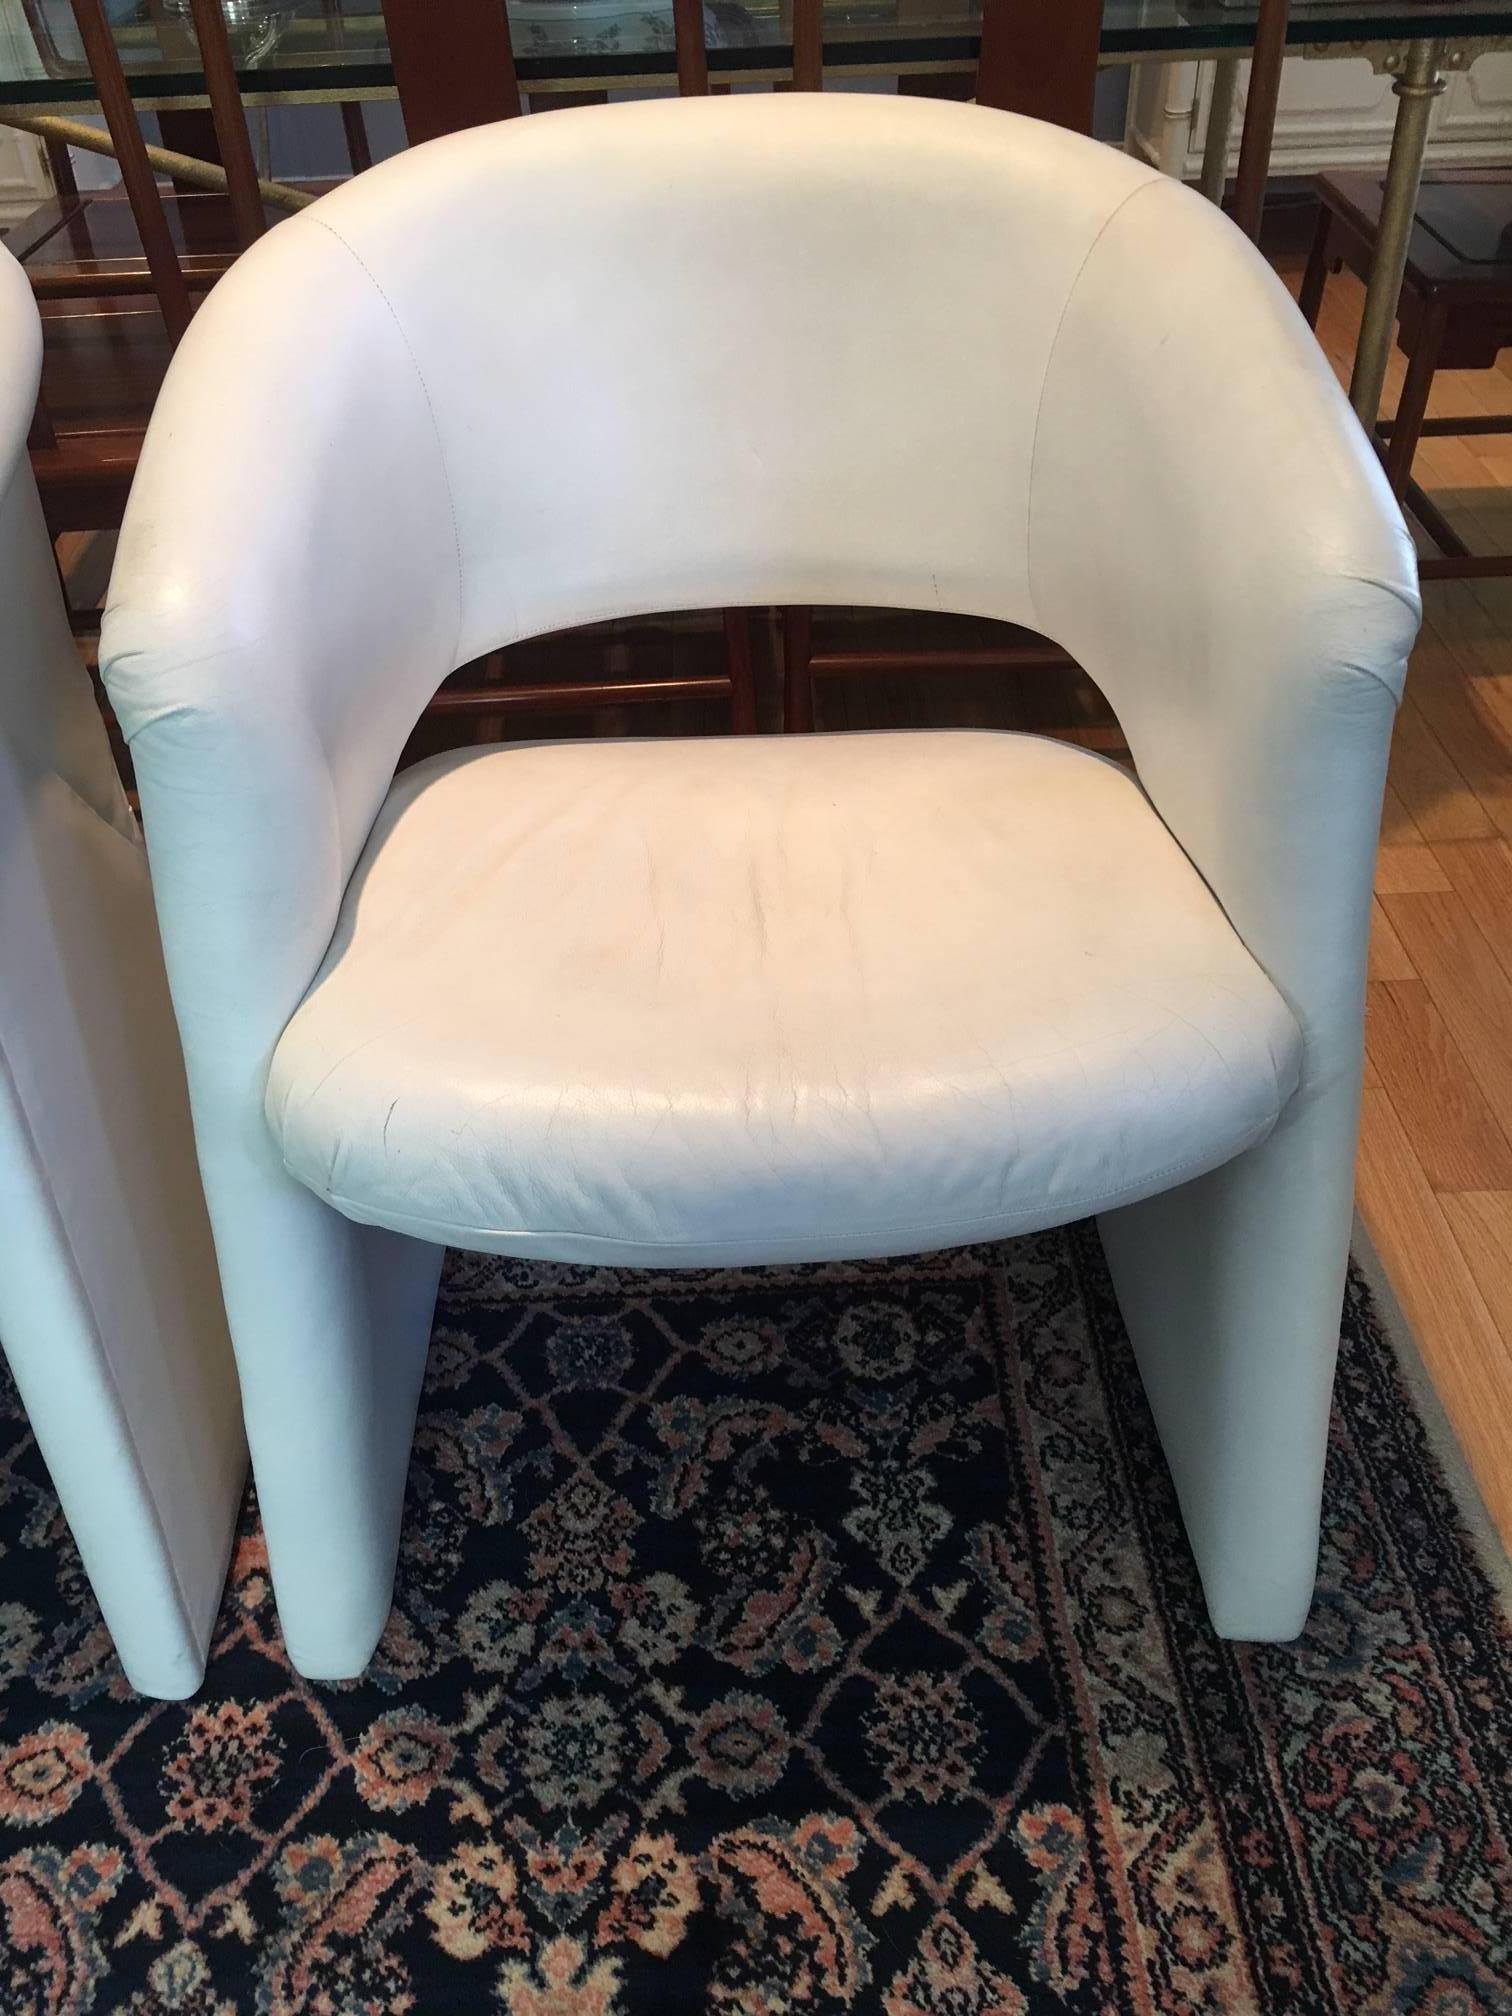 This vintage set is iconic. Upholstered in original white leather, the set is in great condition but with signs of age. The leather has been cleaned and conditioned and will be great to use as is for many more years. Or, you may reupholster if you